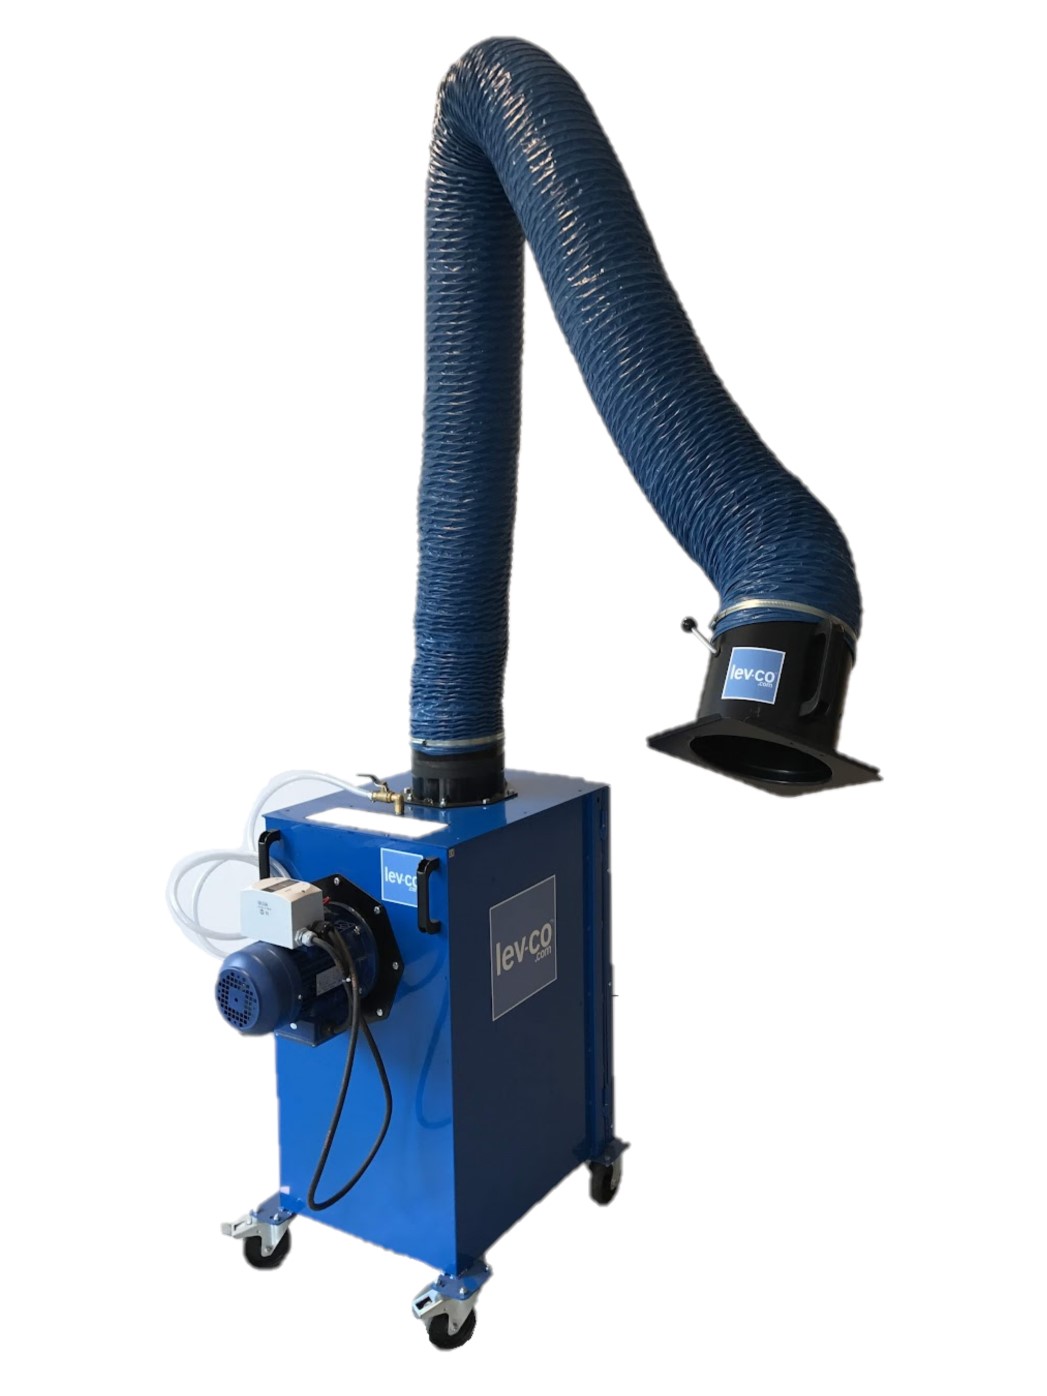 roll-flex-eco-portable-extraction-arm-self-cleaning-filter - High Resolution Image 600